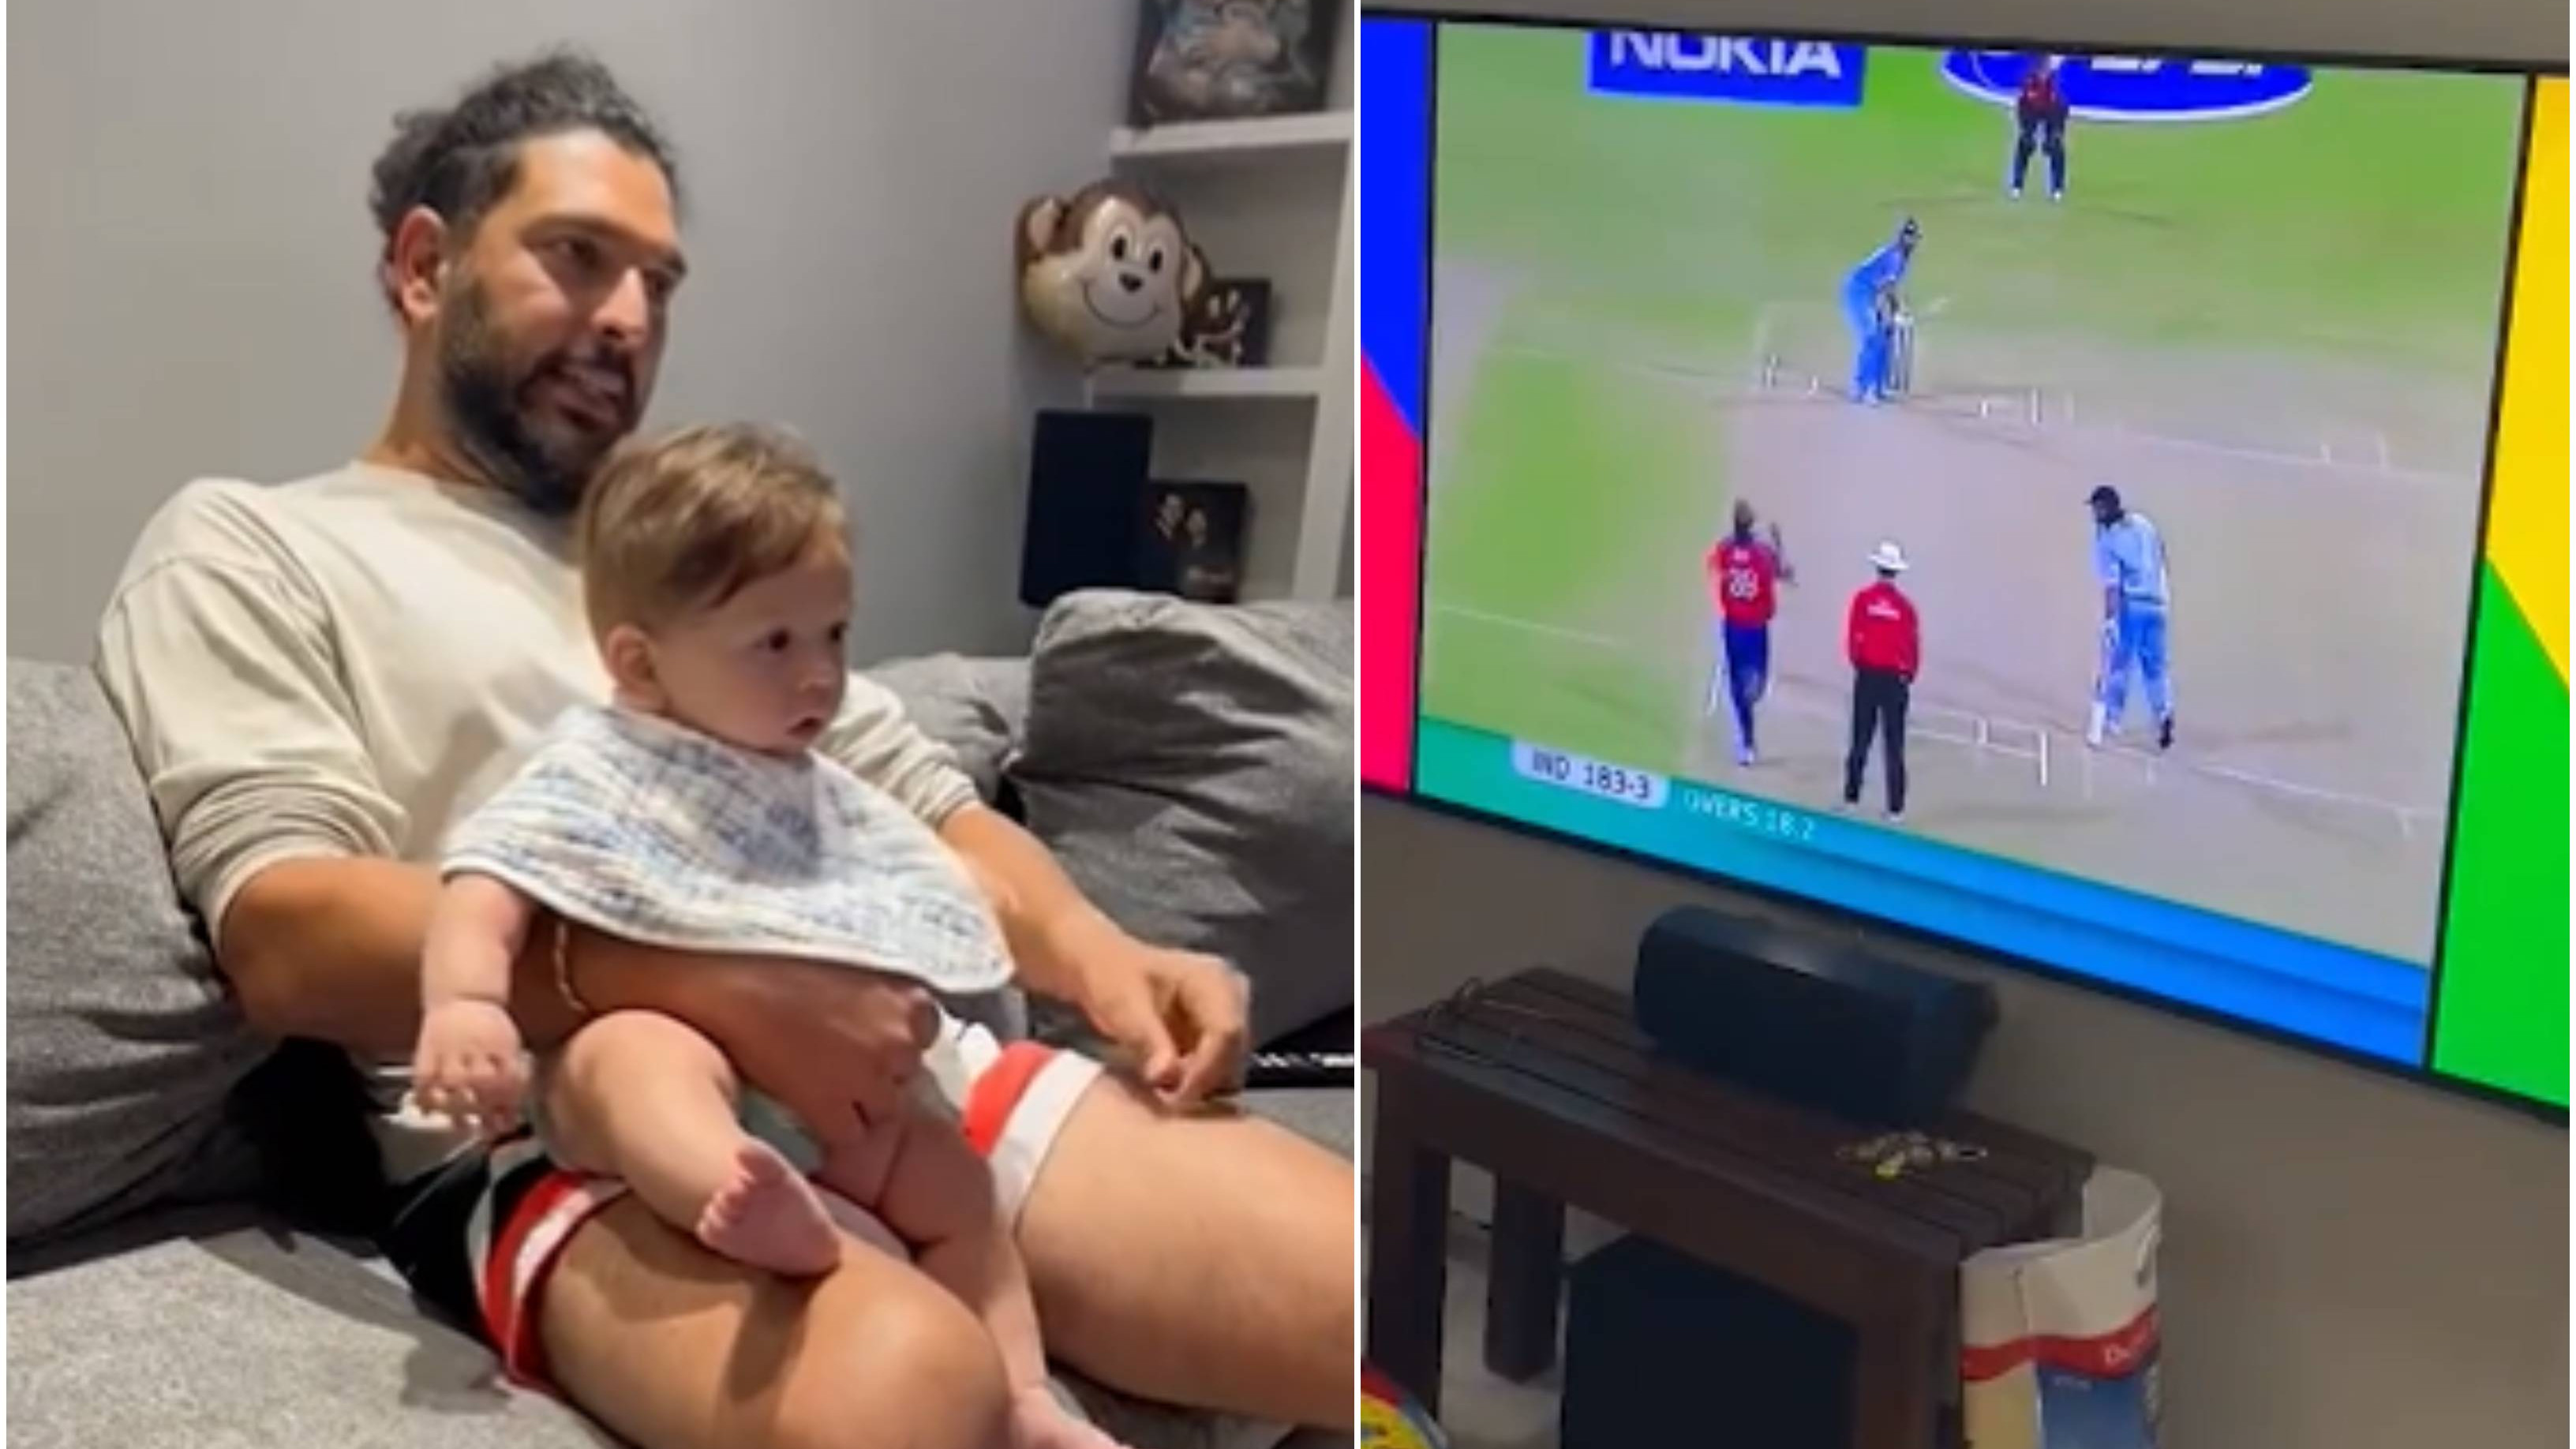 WATCH: Yuvraj Singh revisits his iconic 6 sixes against Stuart Board in the company of his adorable son